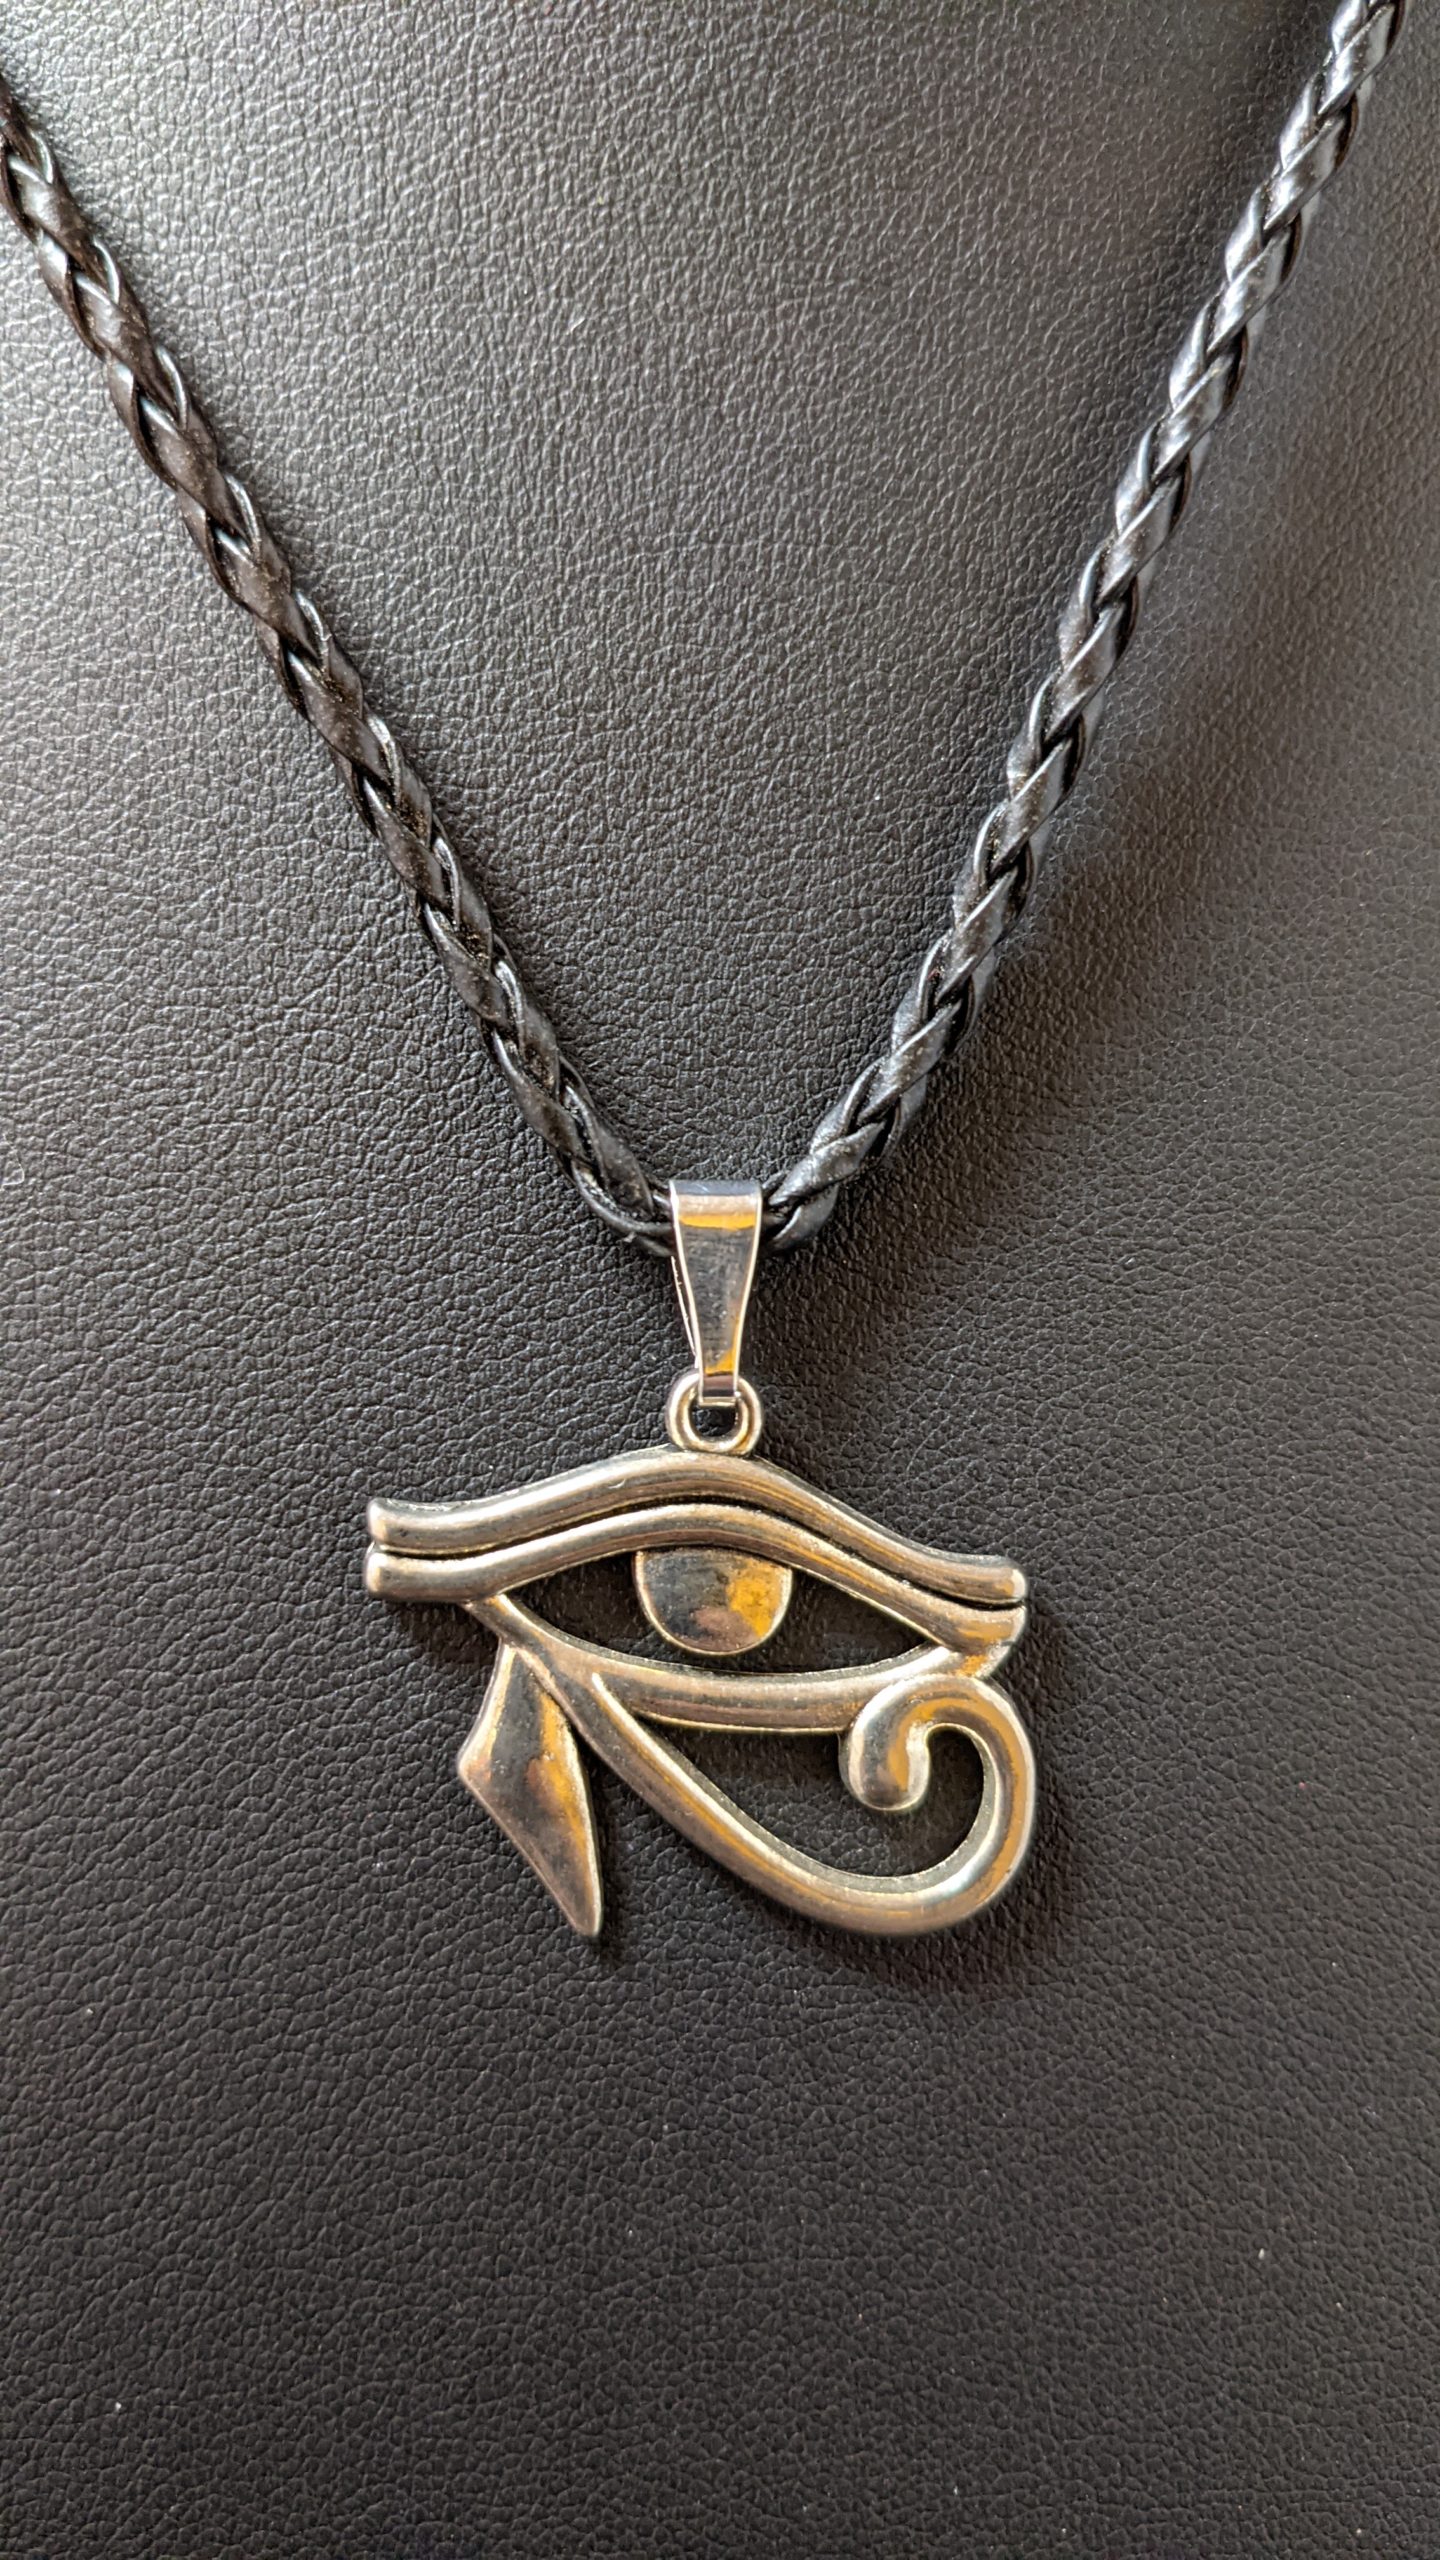 Ancient Egypt The Eye Of Horus Pendant Necklaces Gold Color Round Jewelry |  eBay